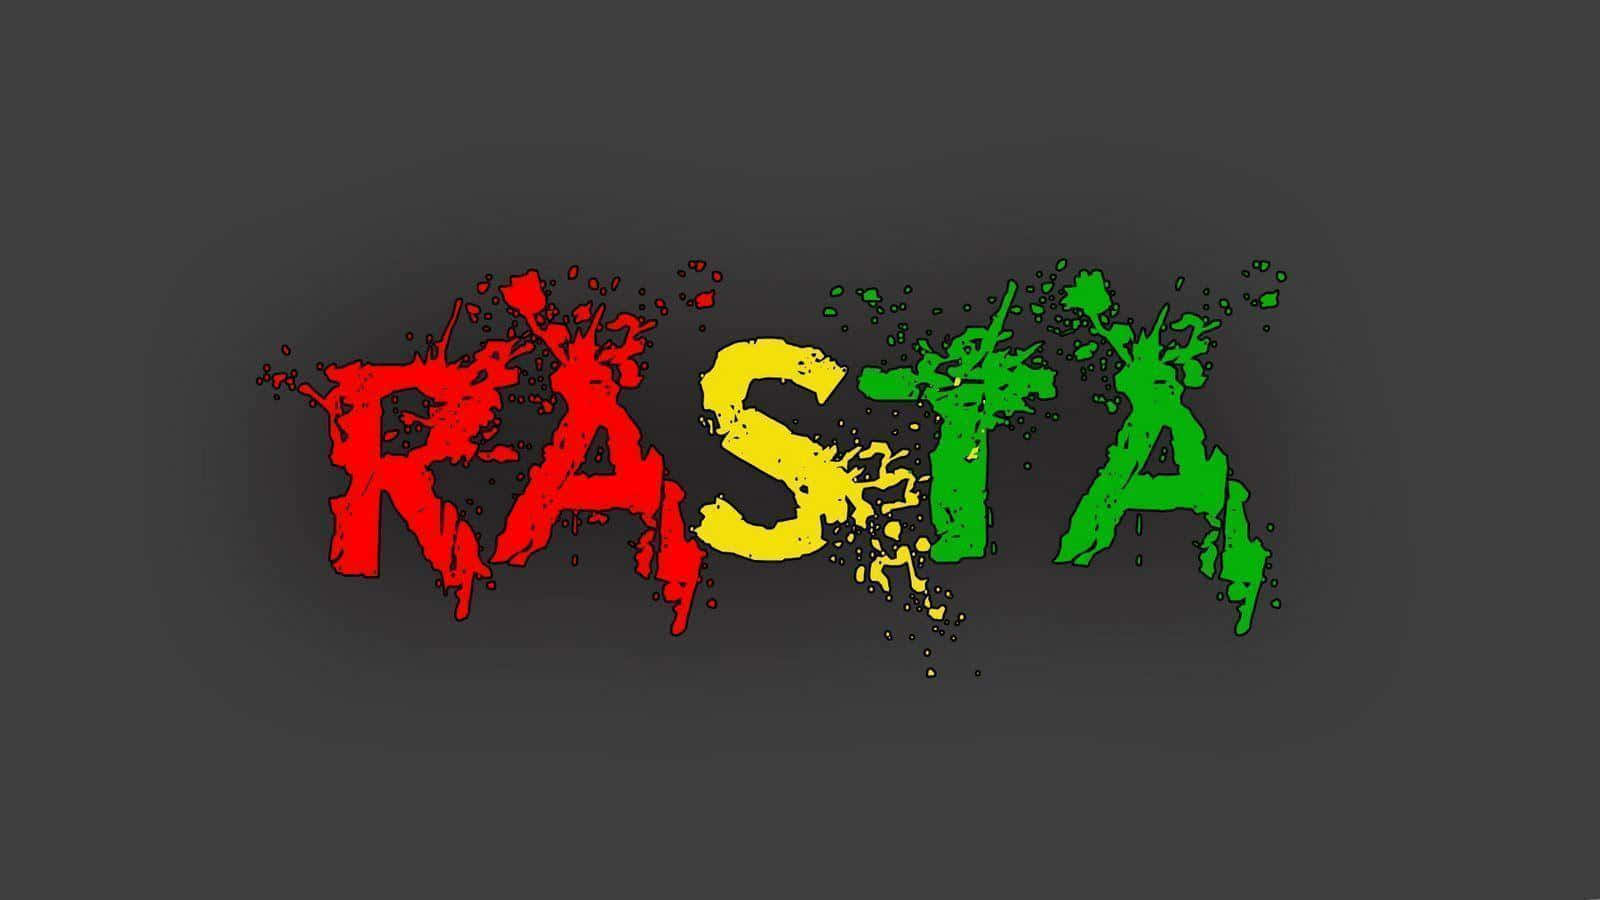 "A giant Rastafarian flag, a symbol of peace and freedom." Wallpaper